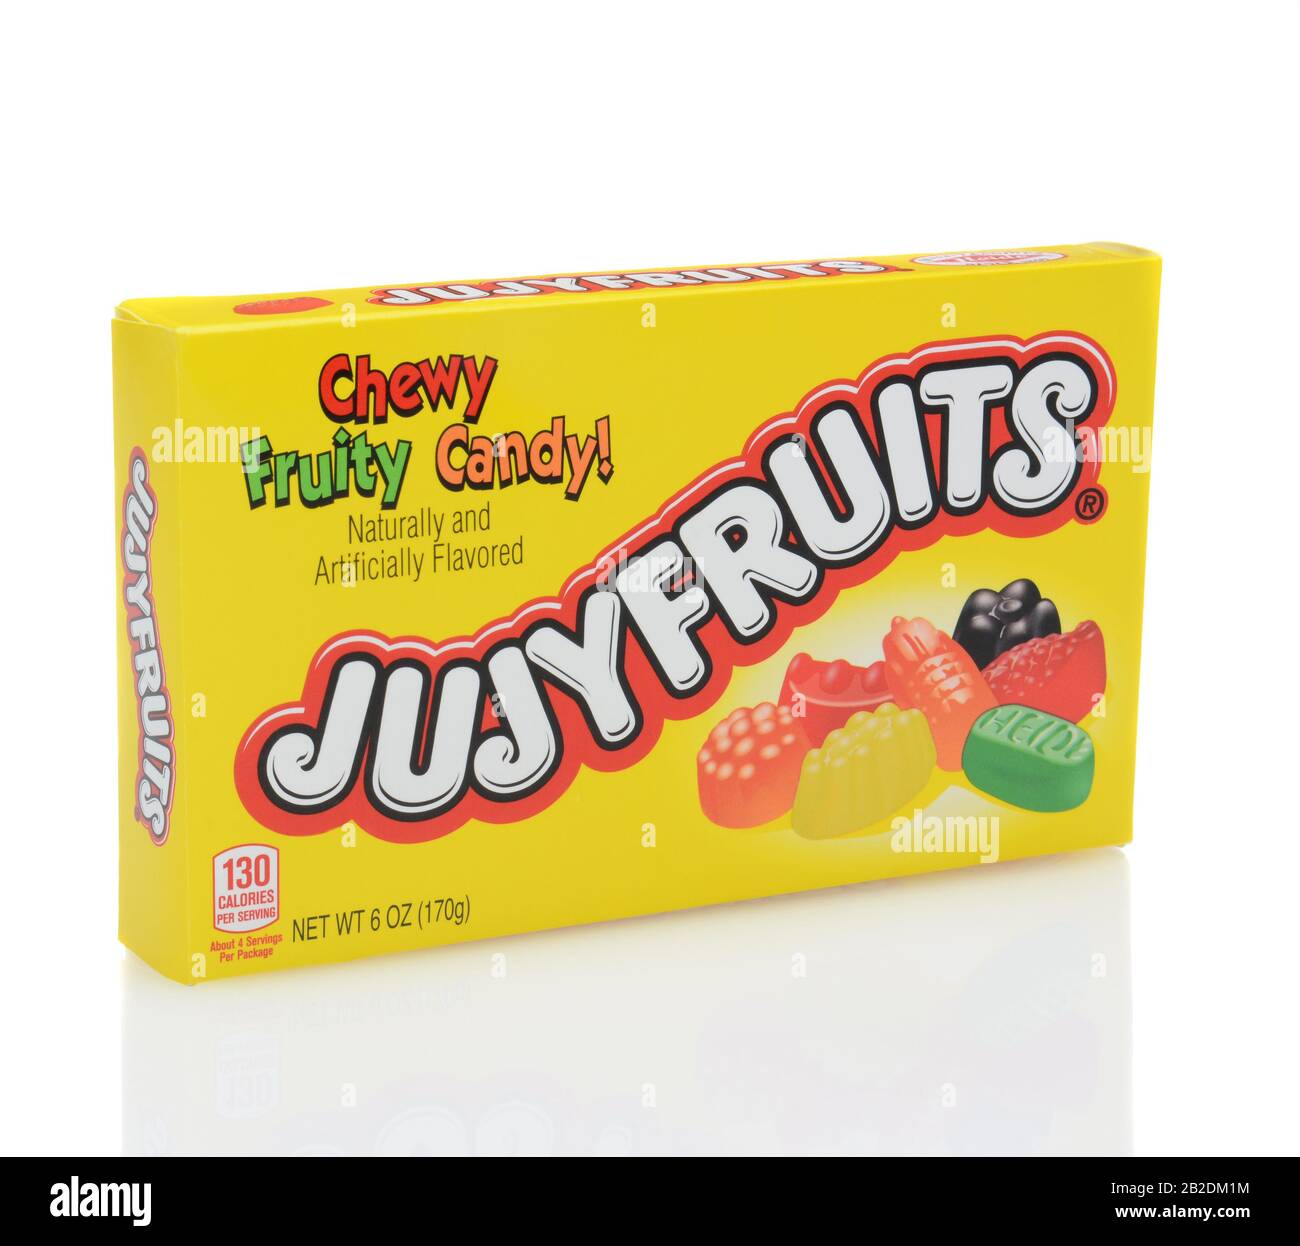 IRVINE, CALIFORNIA - DECEMBER 12, 2014: A box of Jujyfruits Candy. Jujyfruits began production in 1920. The chewy fruity candies are a popular snack i Stock Photo